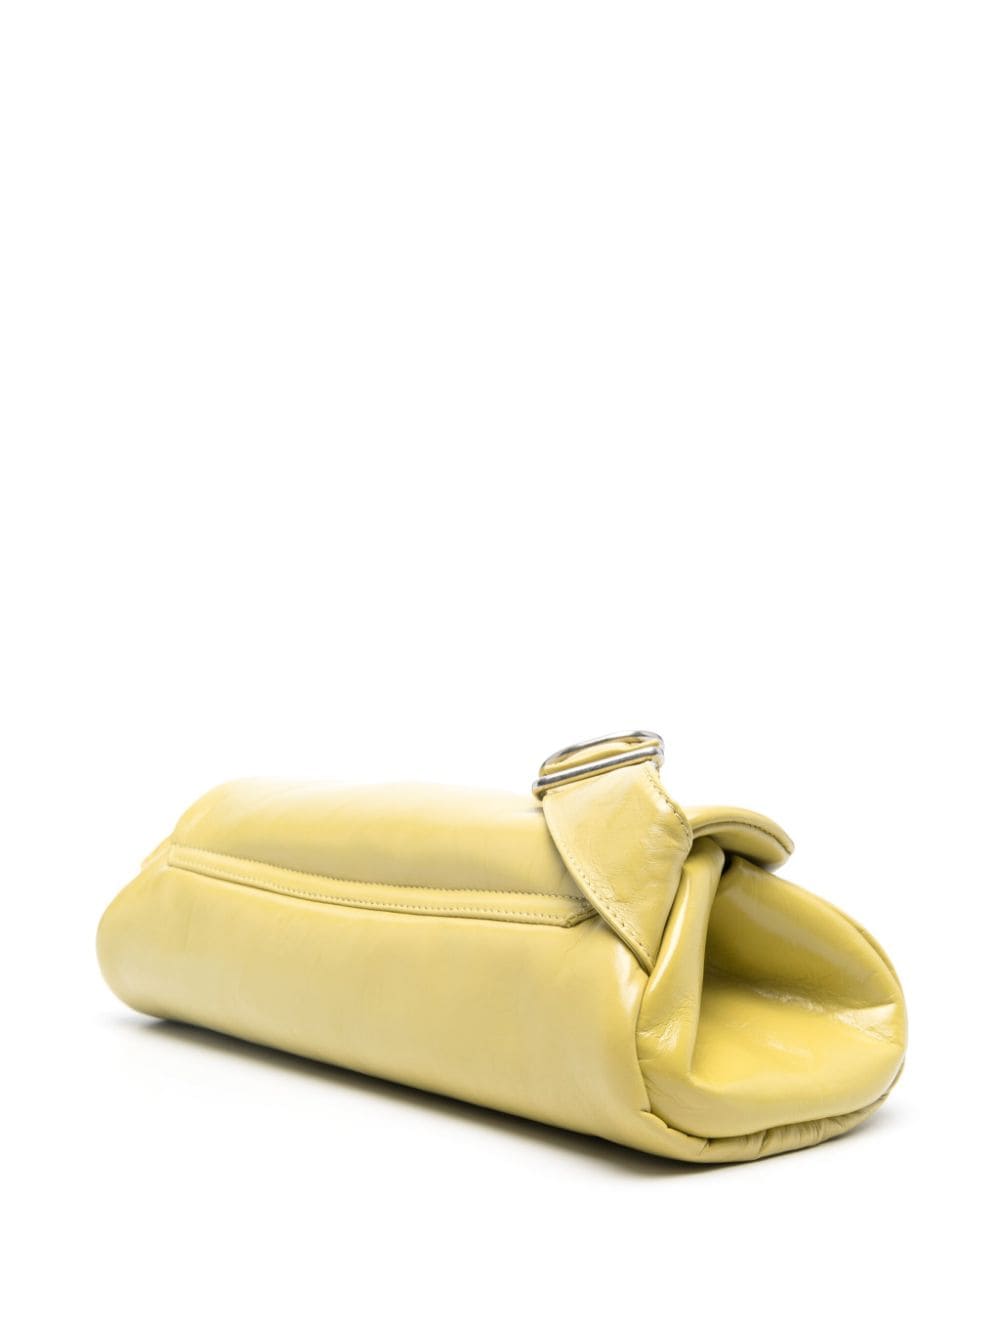 Shop Jil Sander Cannolo Grande Leather Bag In Yellow